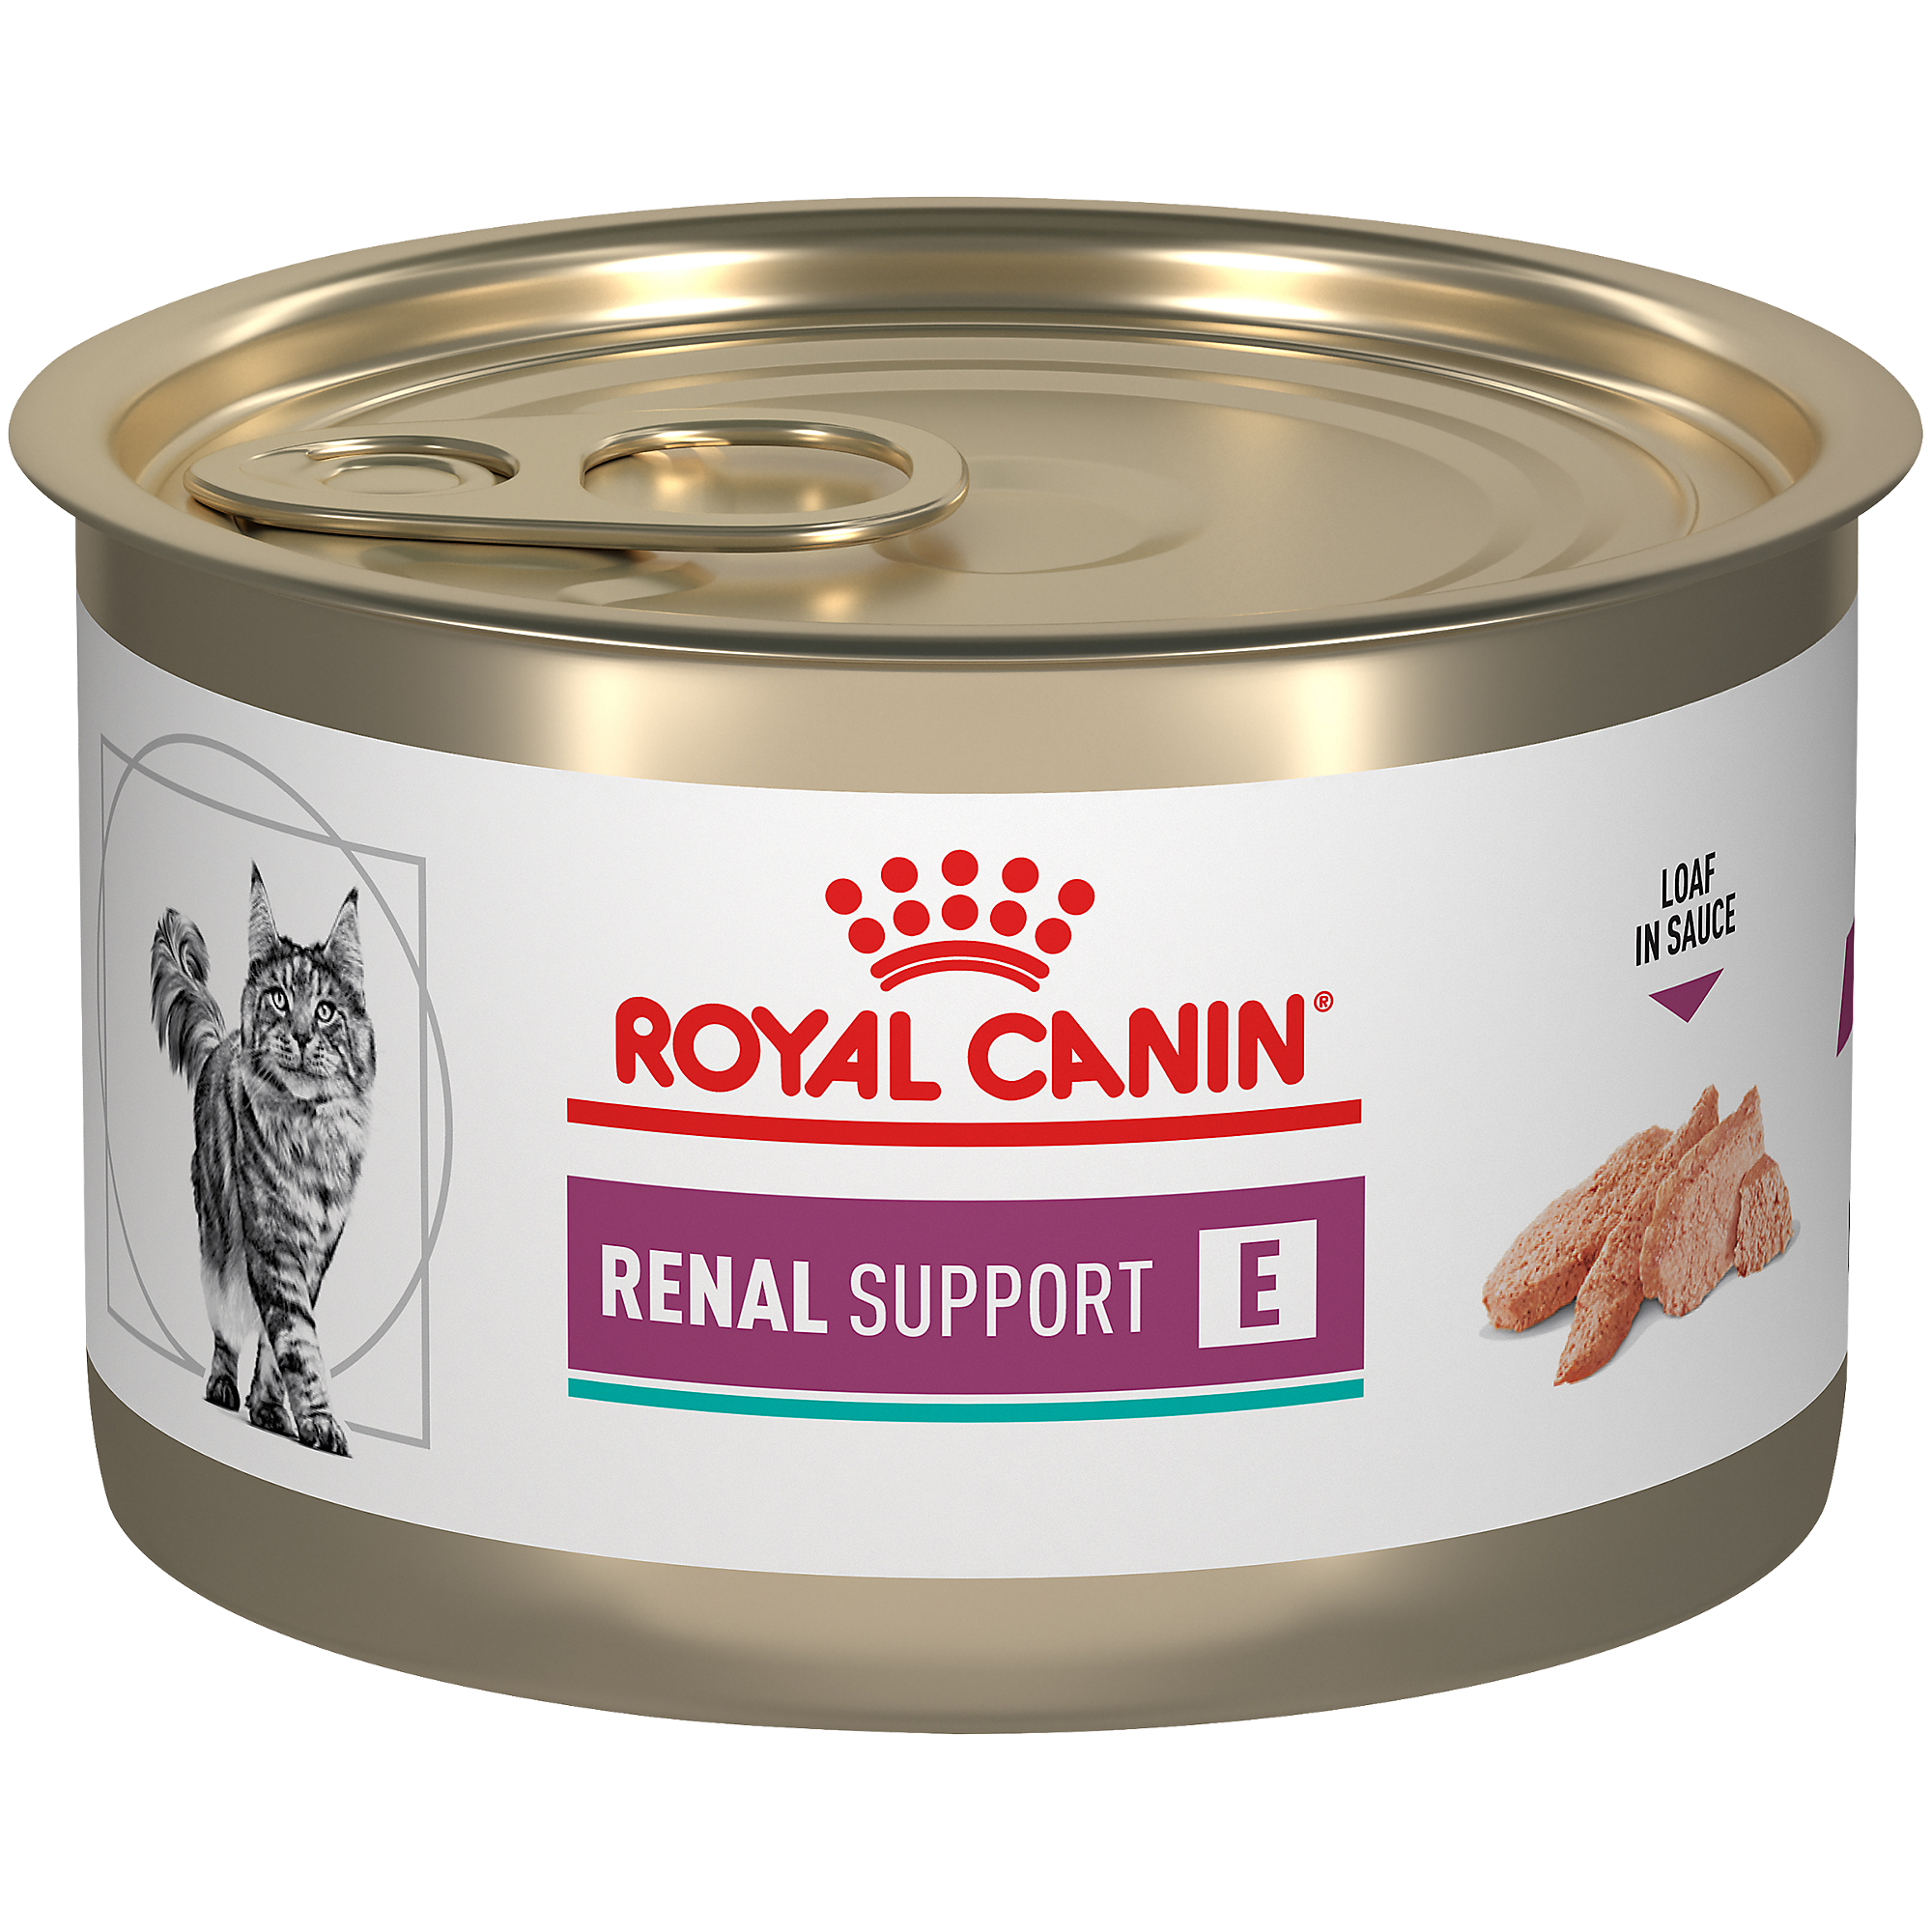 Royal Canin® Feline Renal Support E loaf in Sauce Canned Cat Food, 5.1 oz